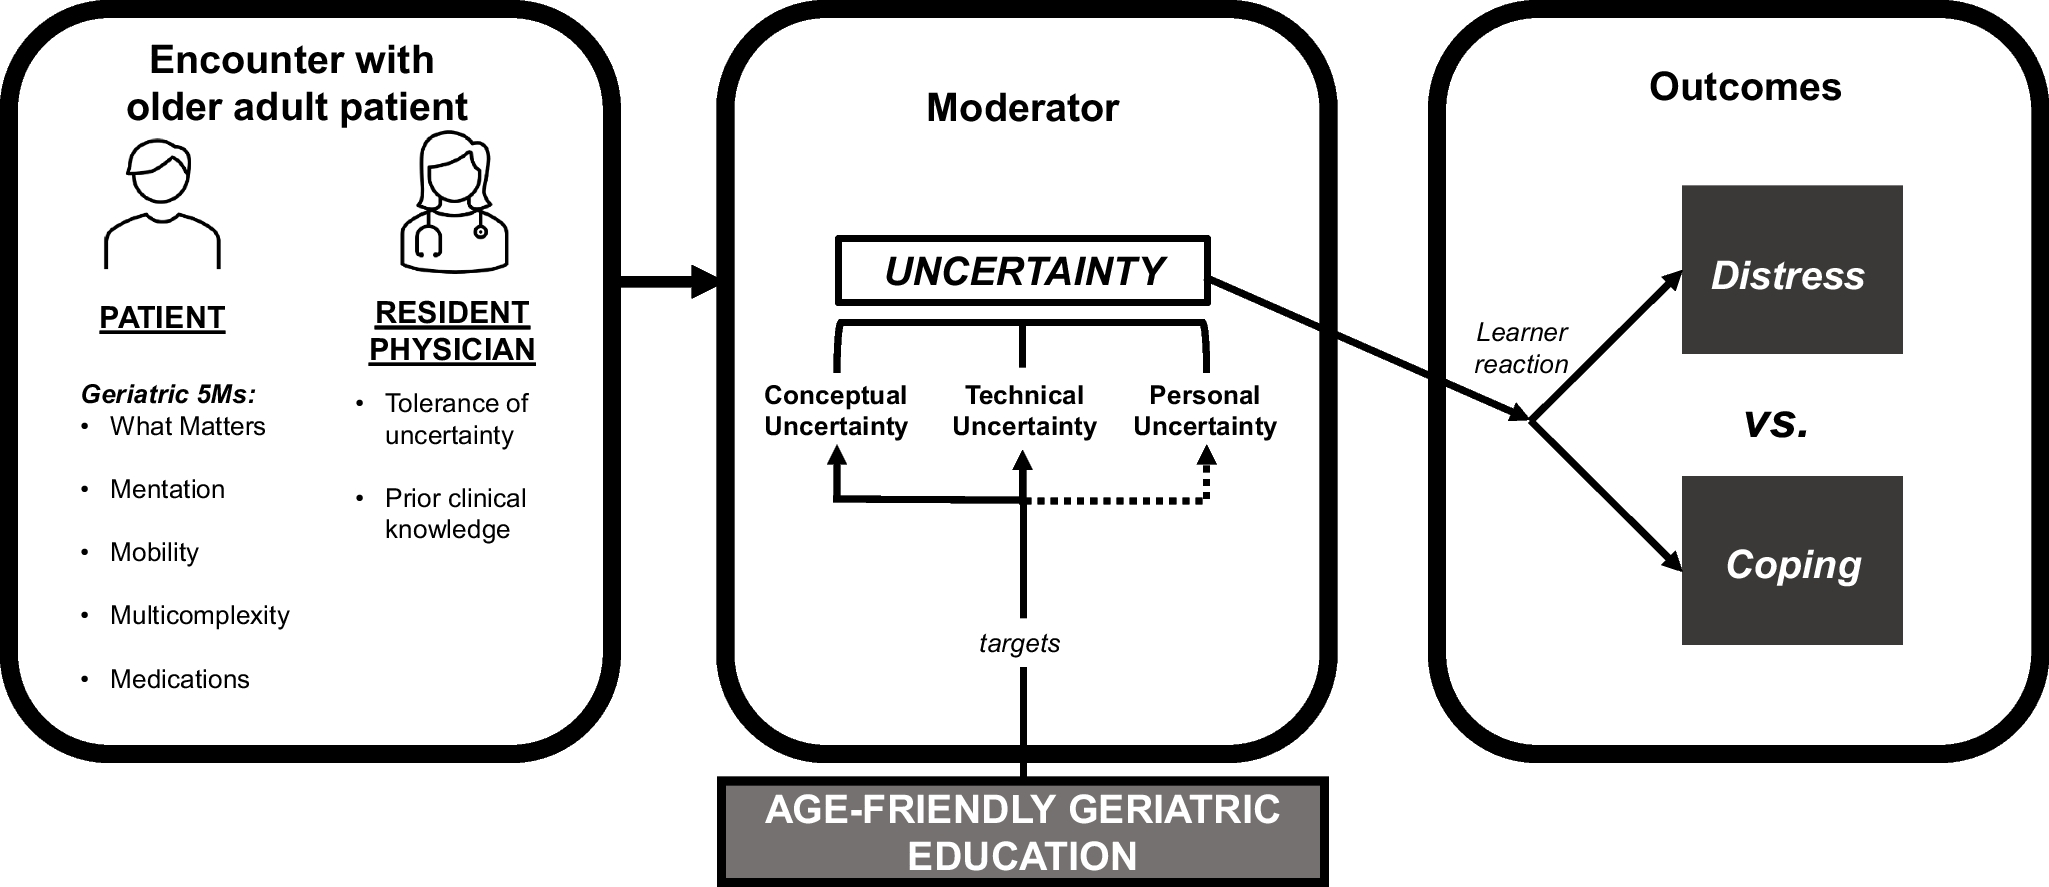 “What’s Going to Happen?”: Internal Medicine Resident Experiences of Uncertainty in the Care of Older Adults